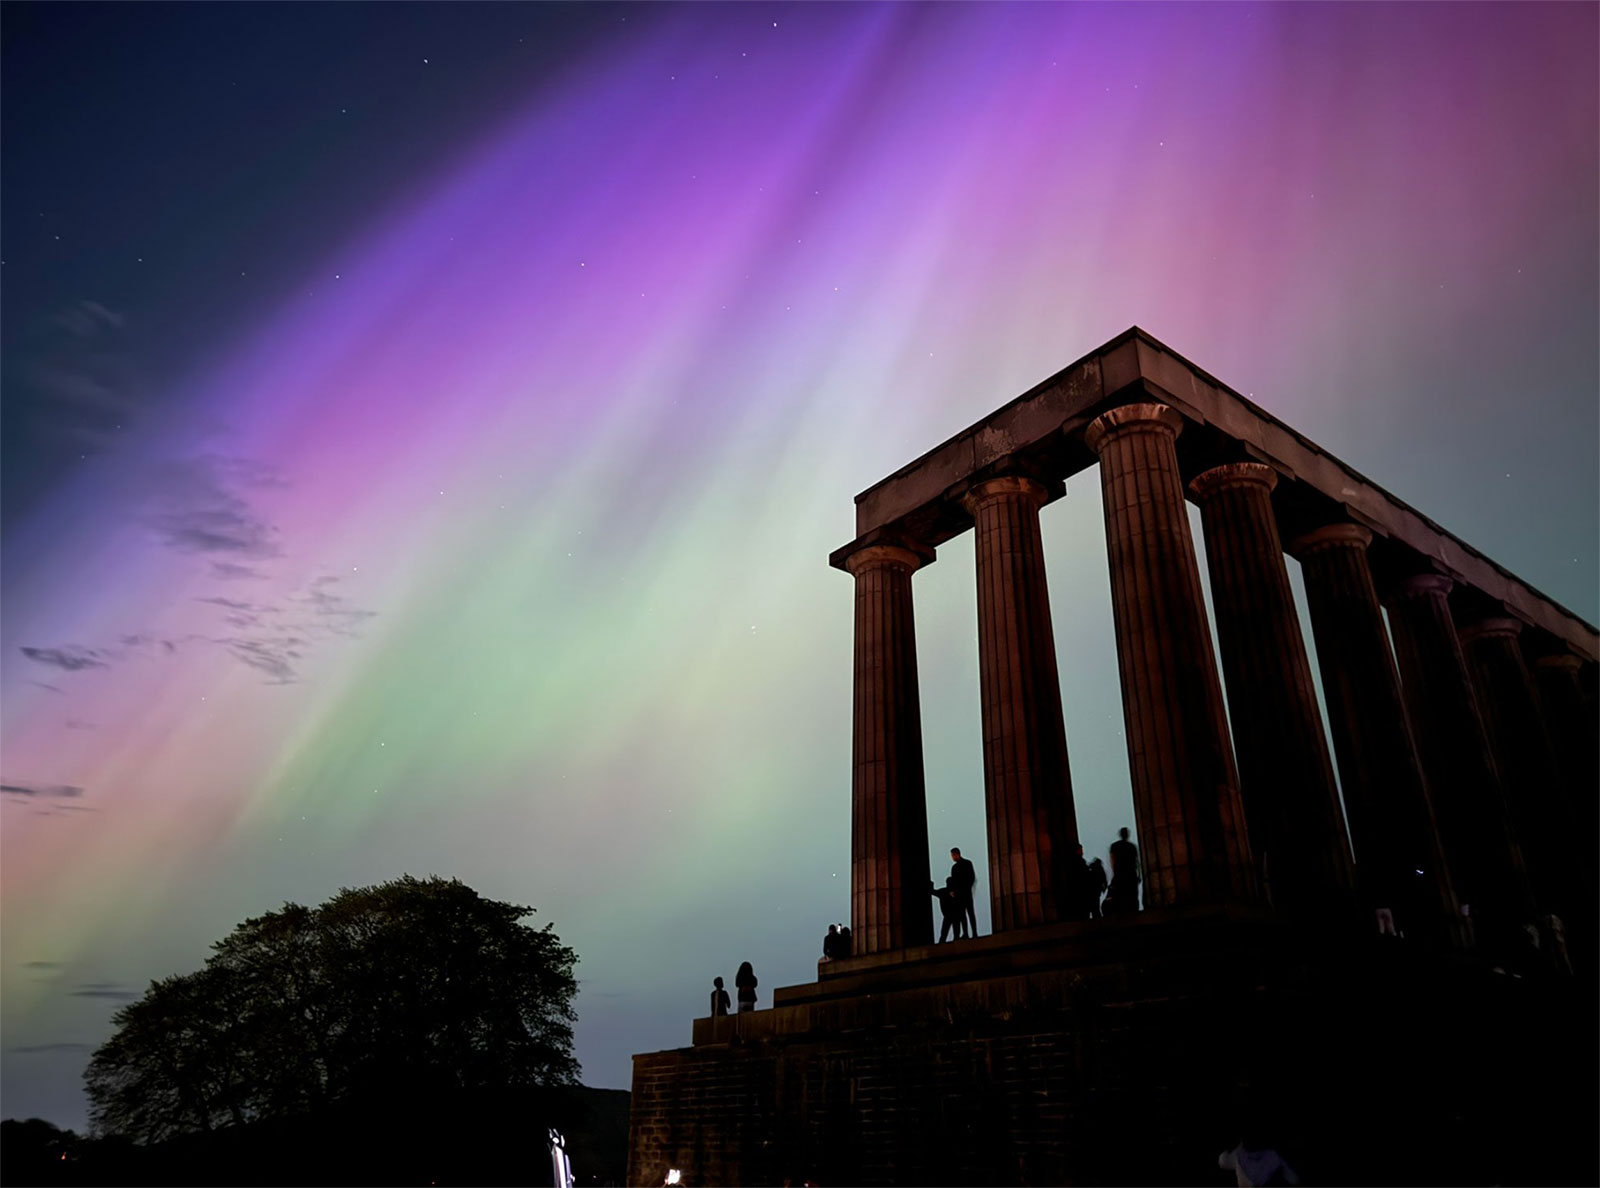 Jacob Anderson shared this image of the lights seen in Edinburgh, Scotland.